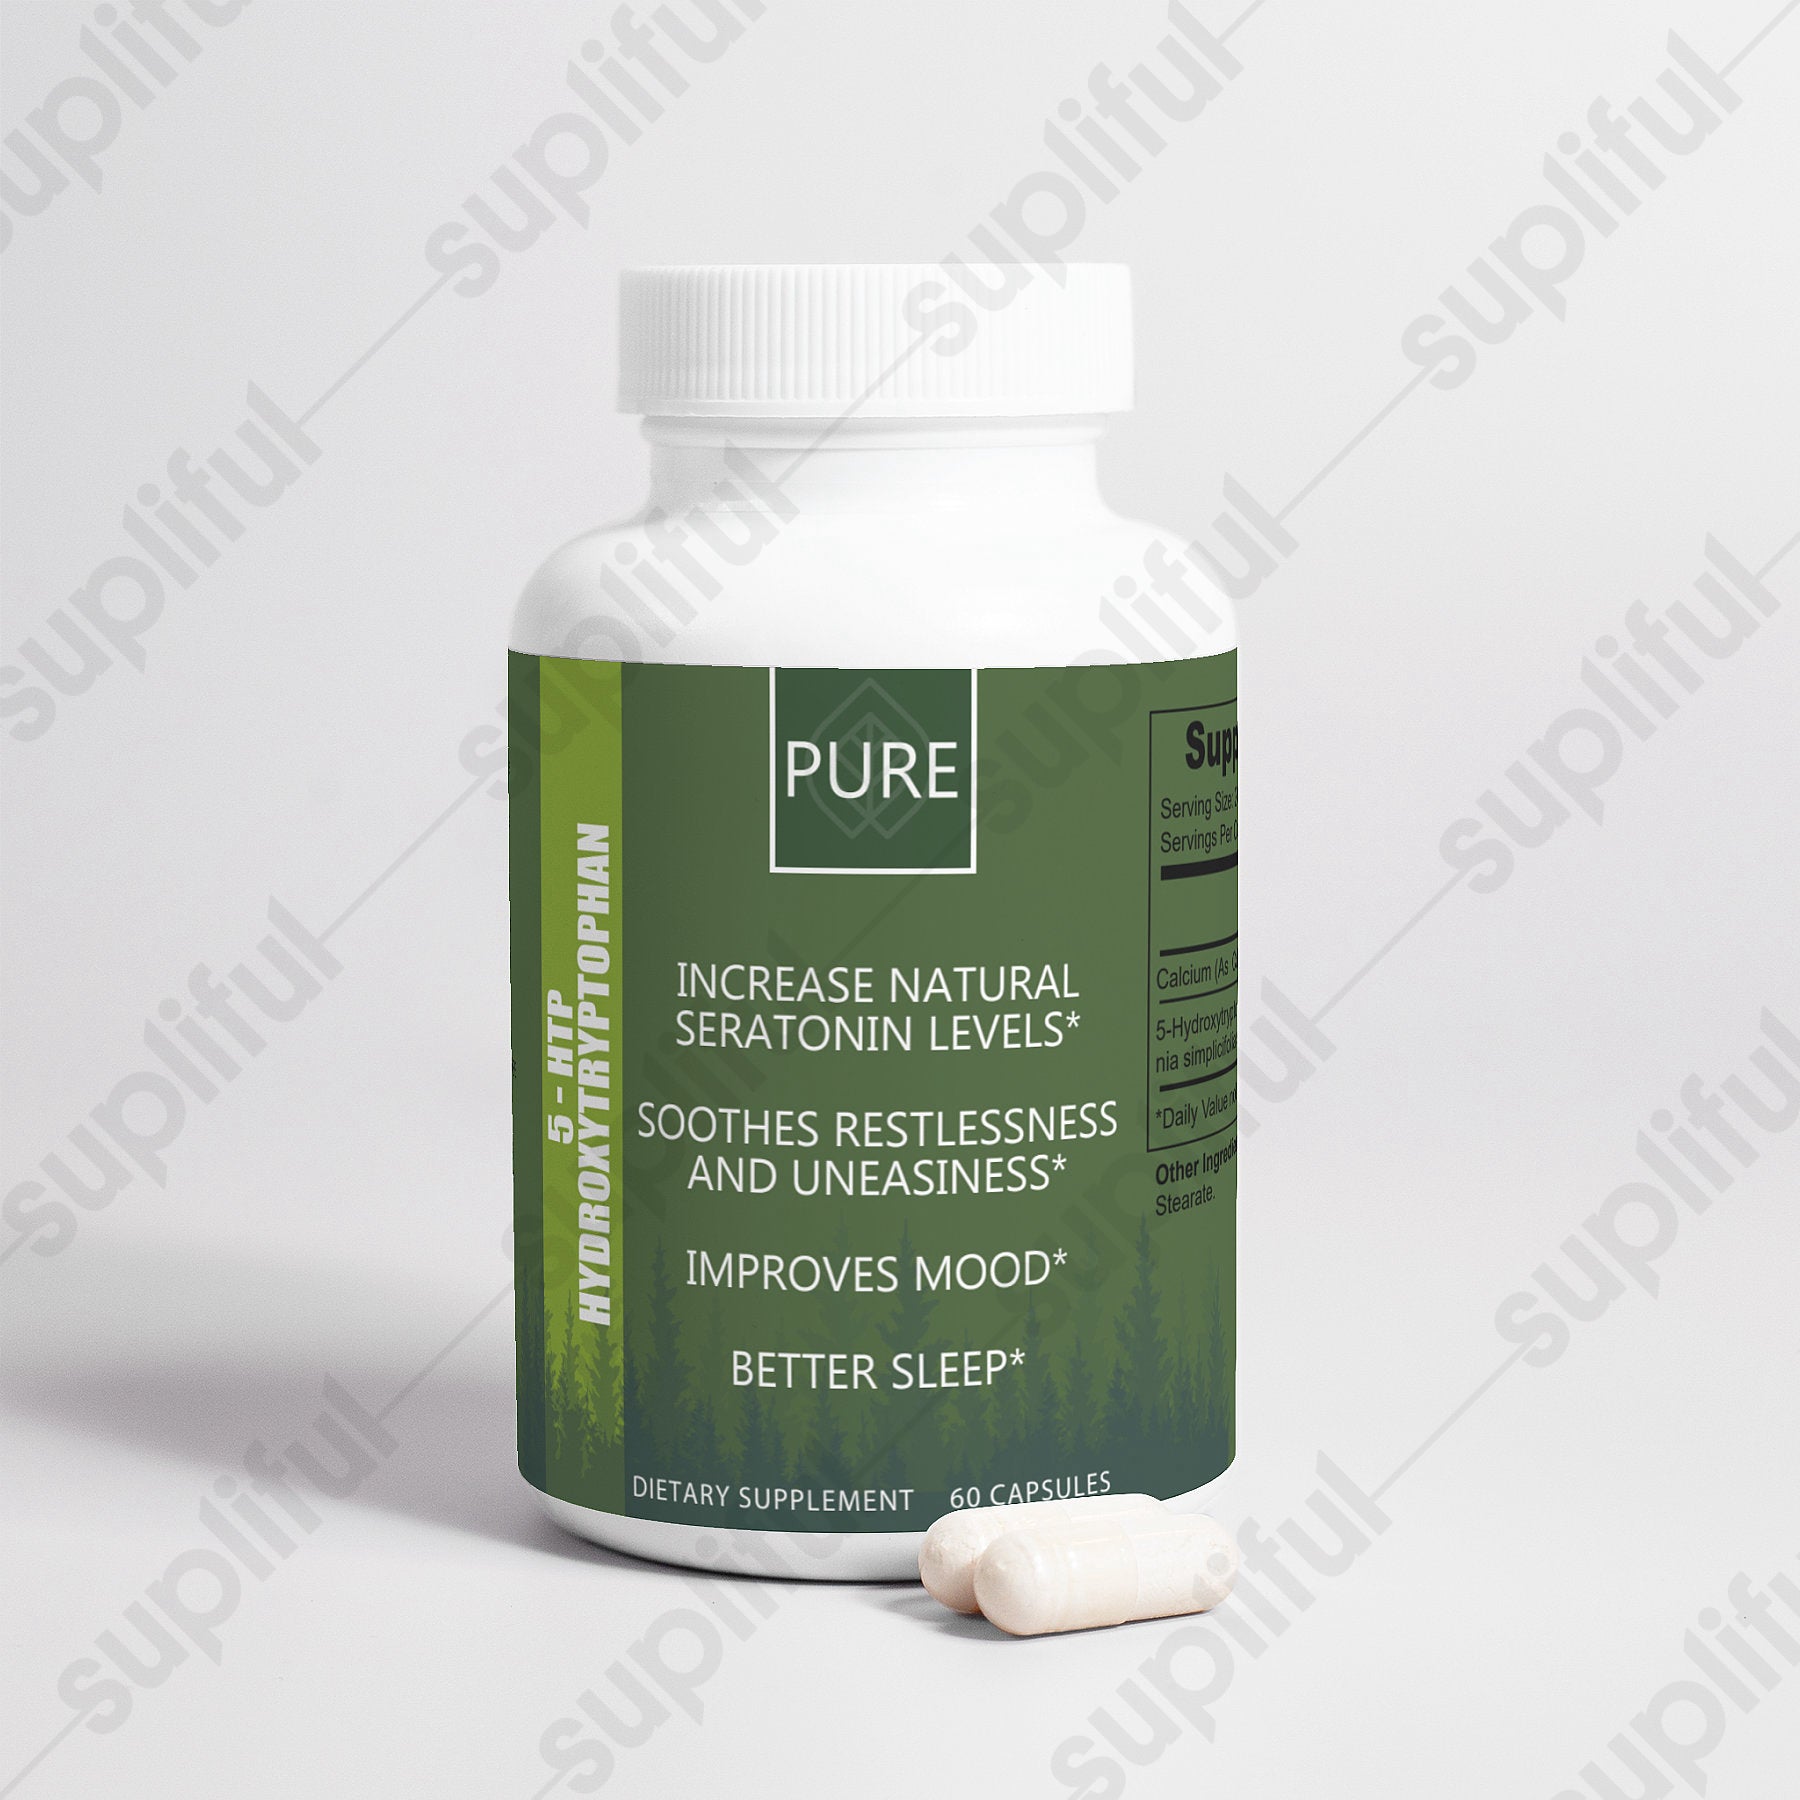 PURE. 5-HTP - Improves Sleep and Mood Quiets Unwanted Anxiety PURE Supplement